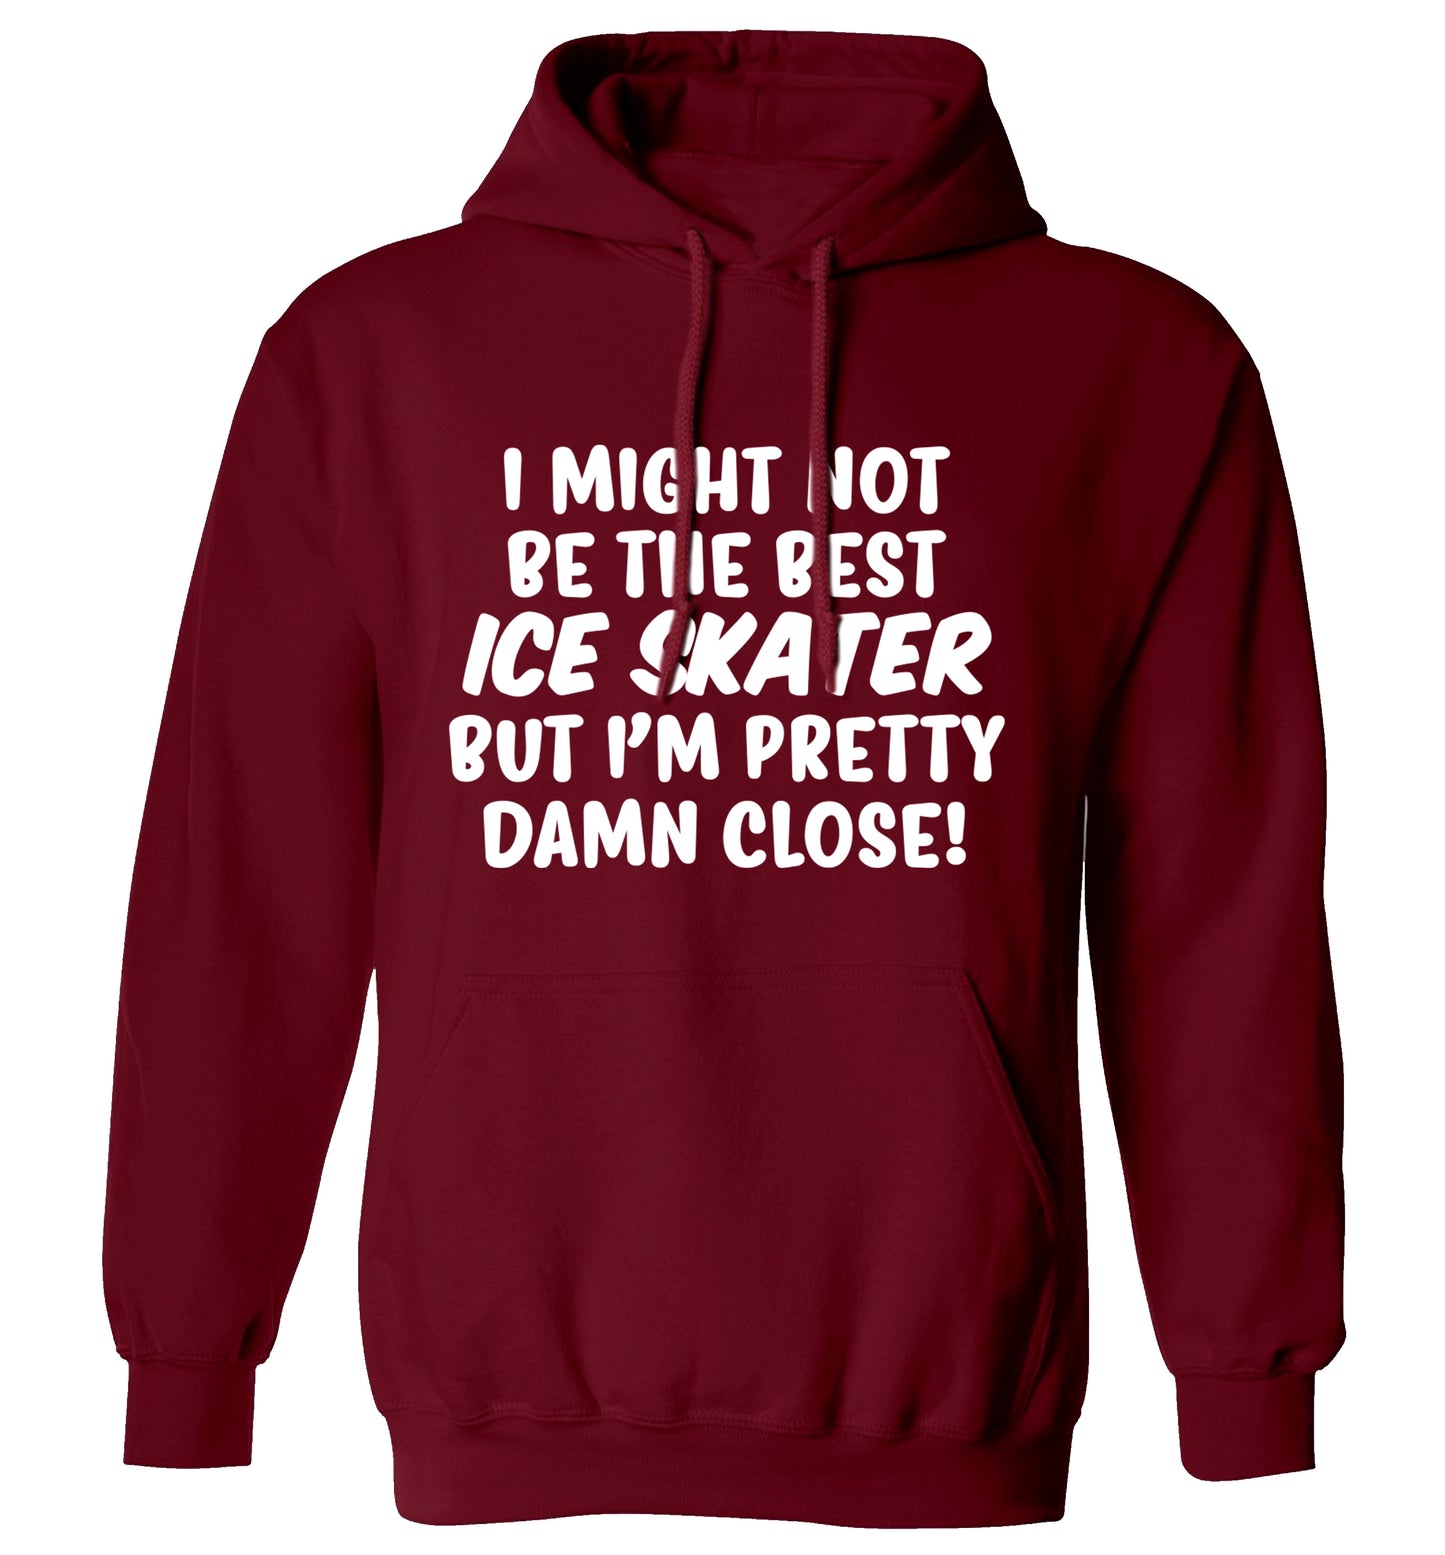 I might not be the best ice skater but I'm pretty damn close! adults unisexmaroon hoodie 2XL